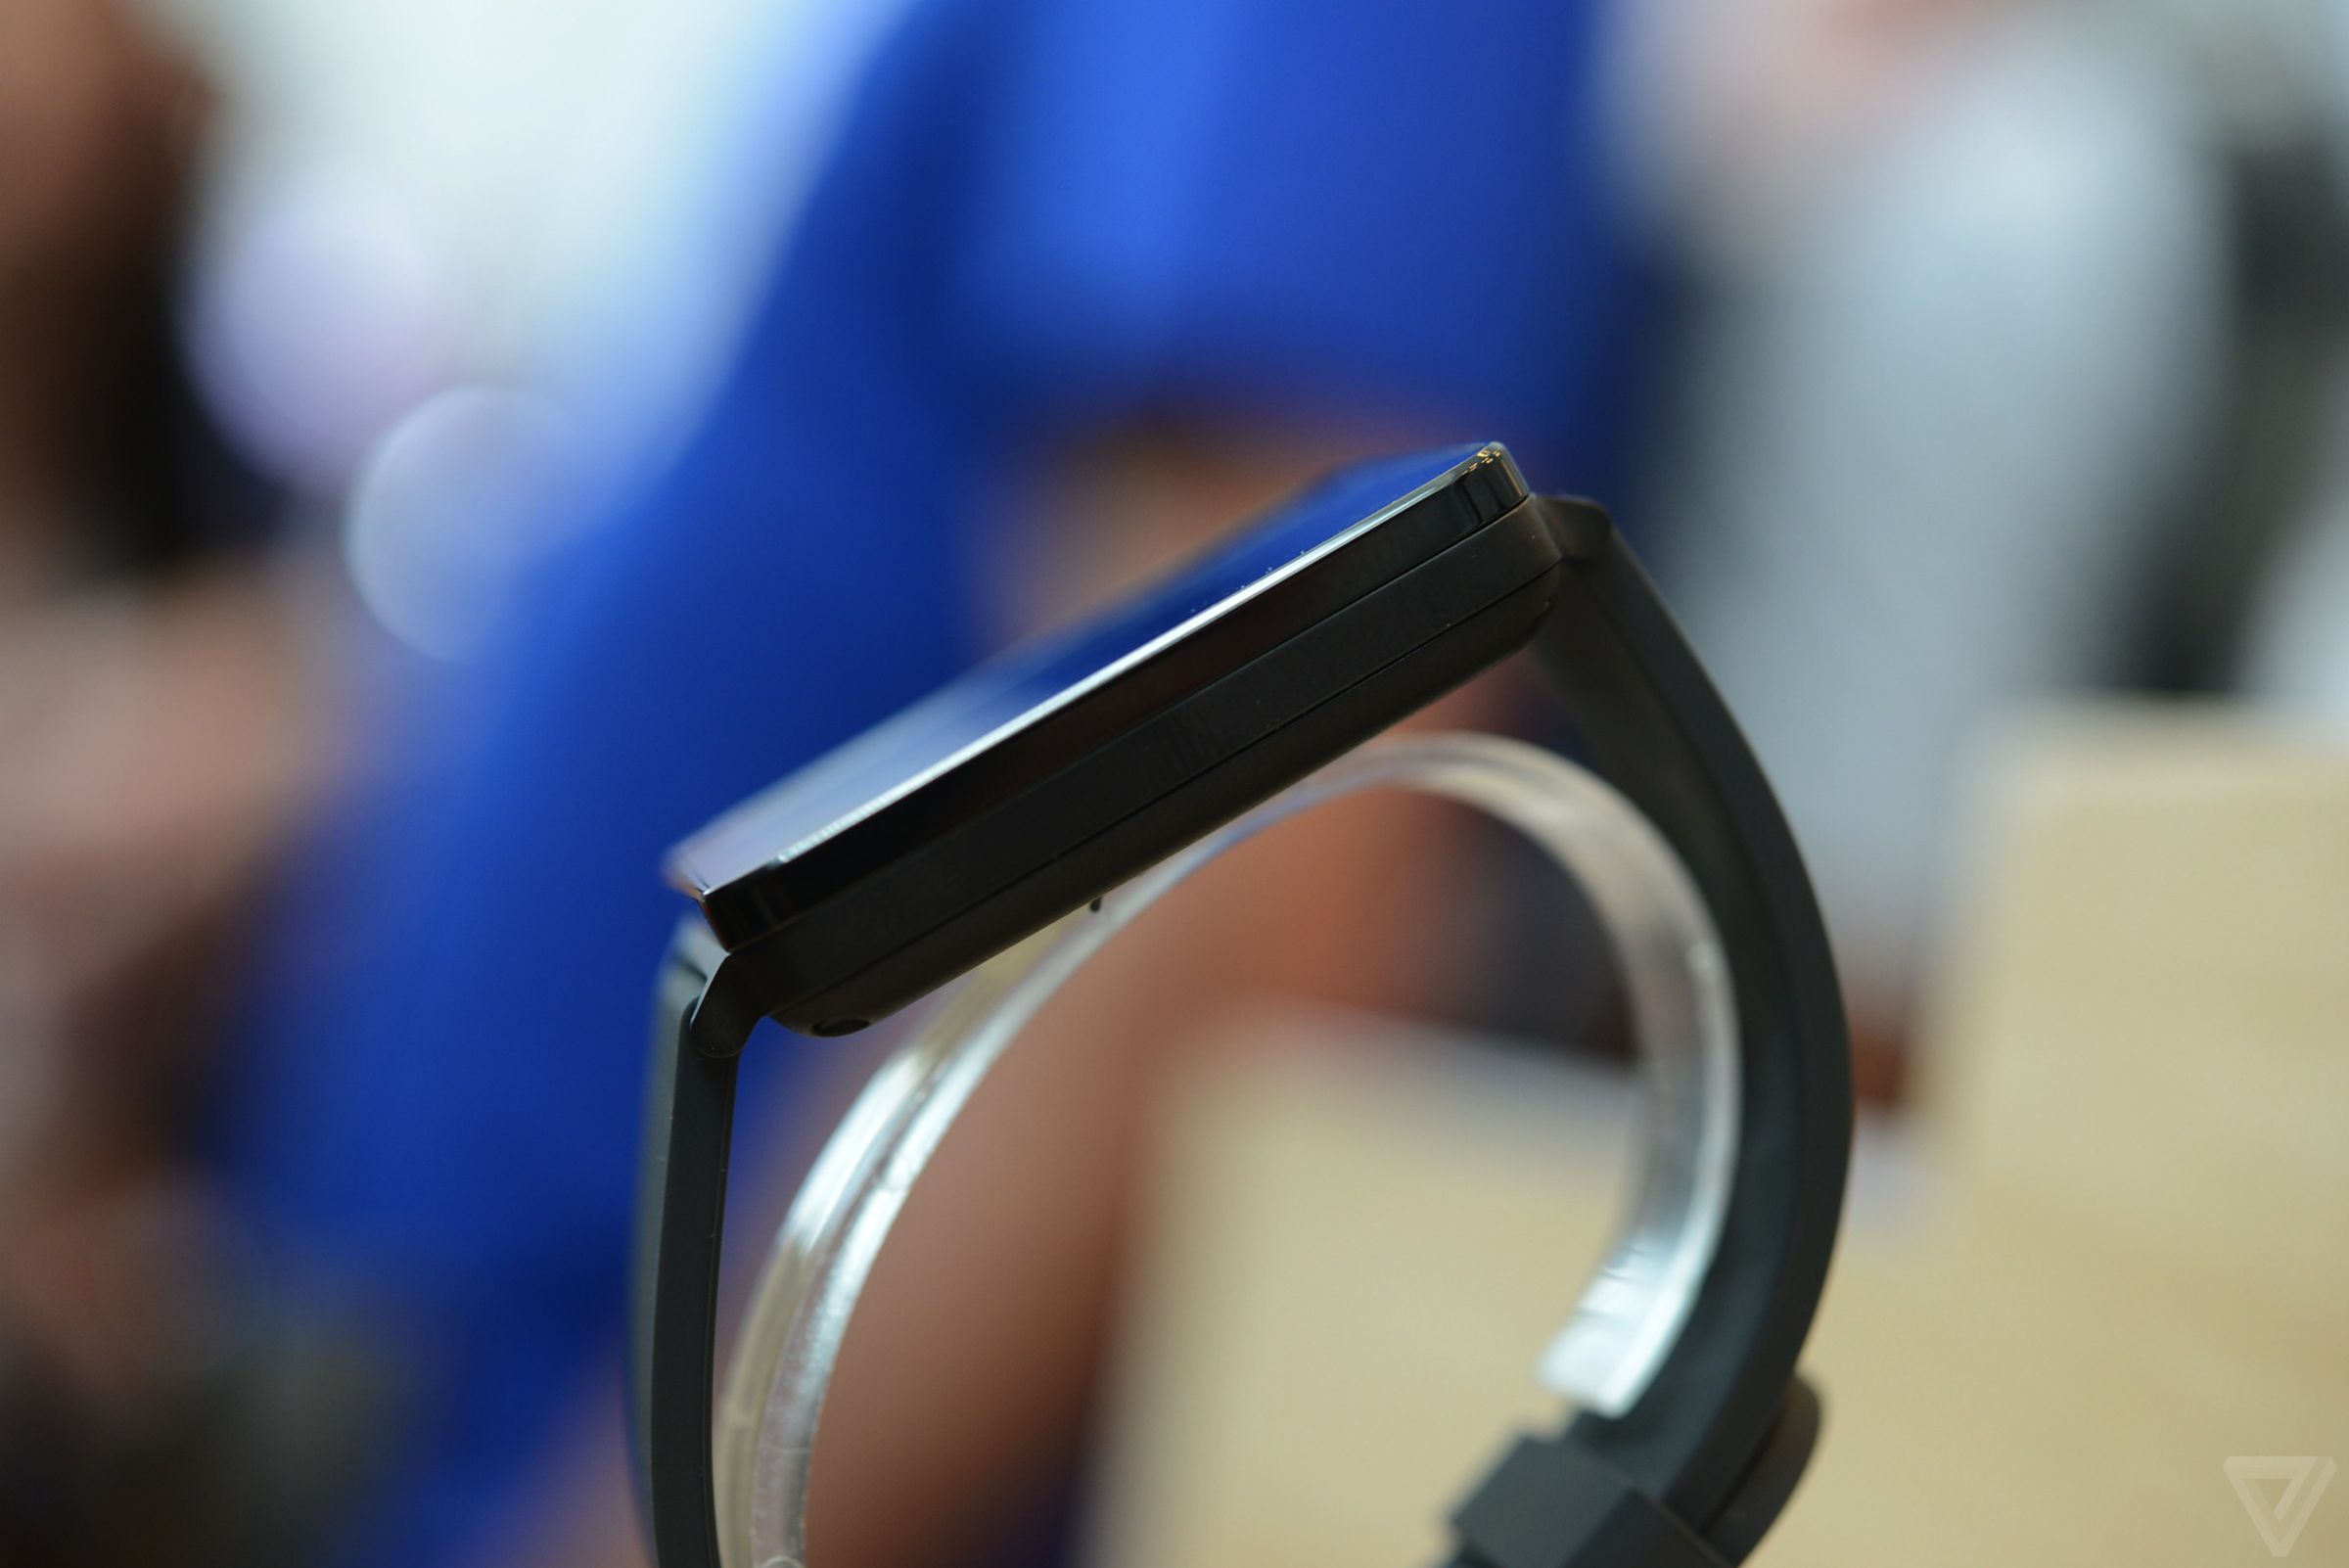 LG G Watch hands-on pictures